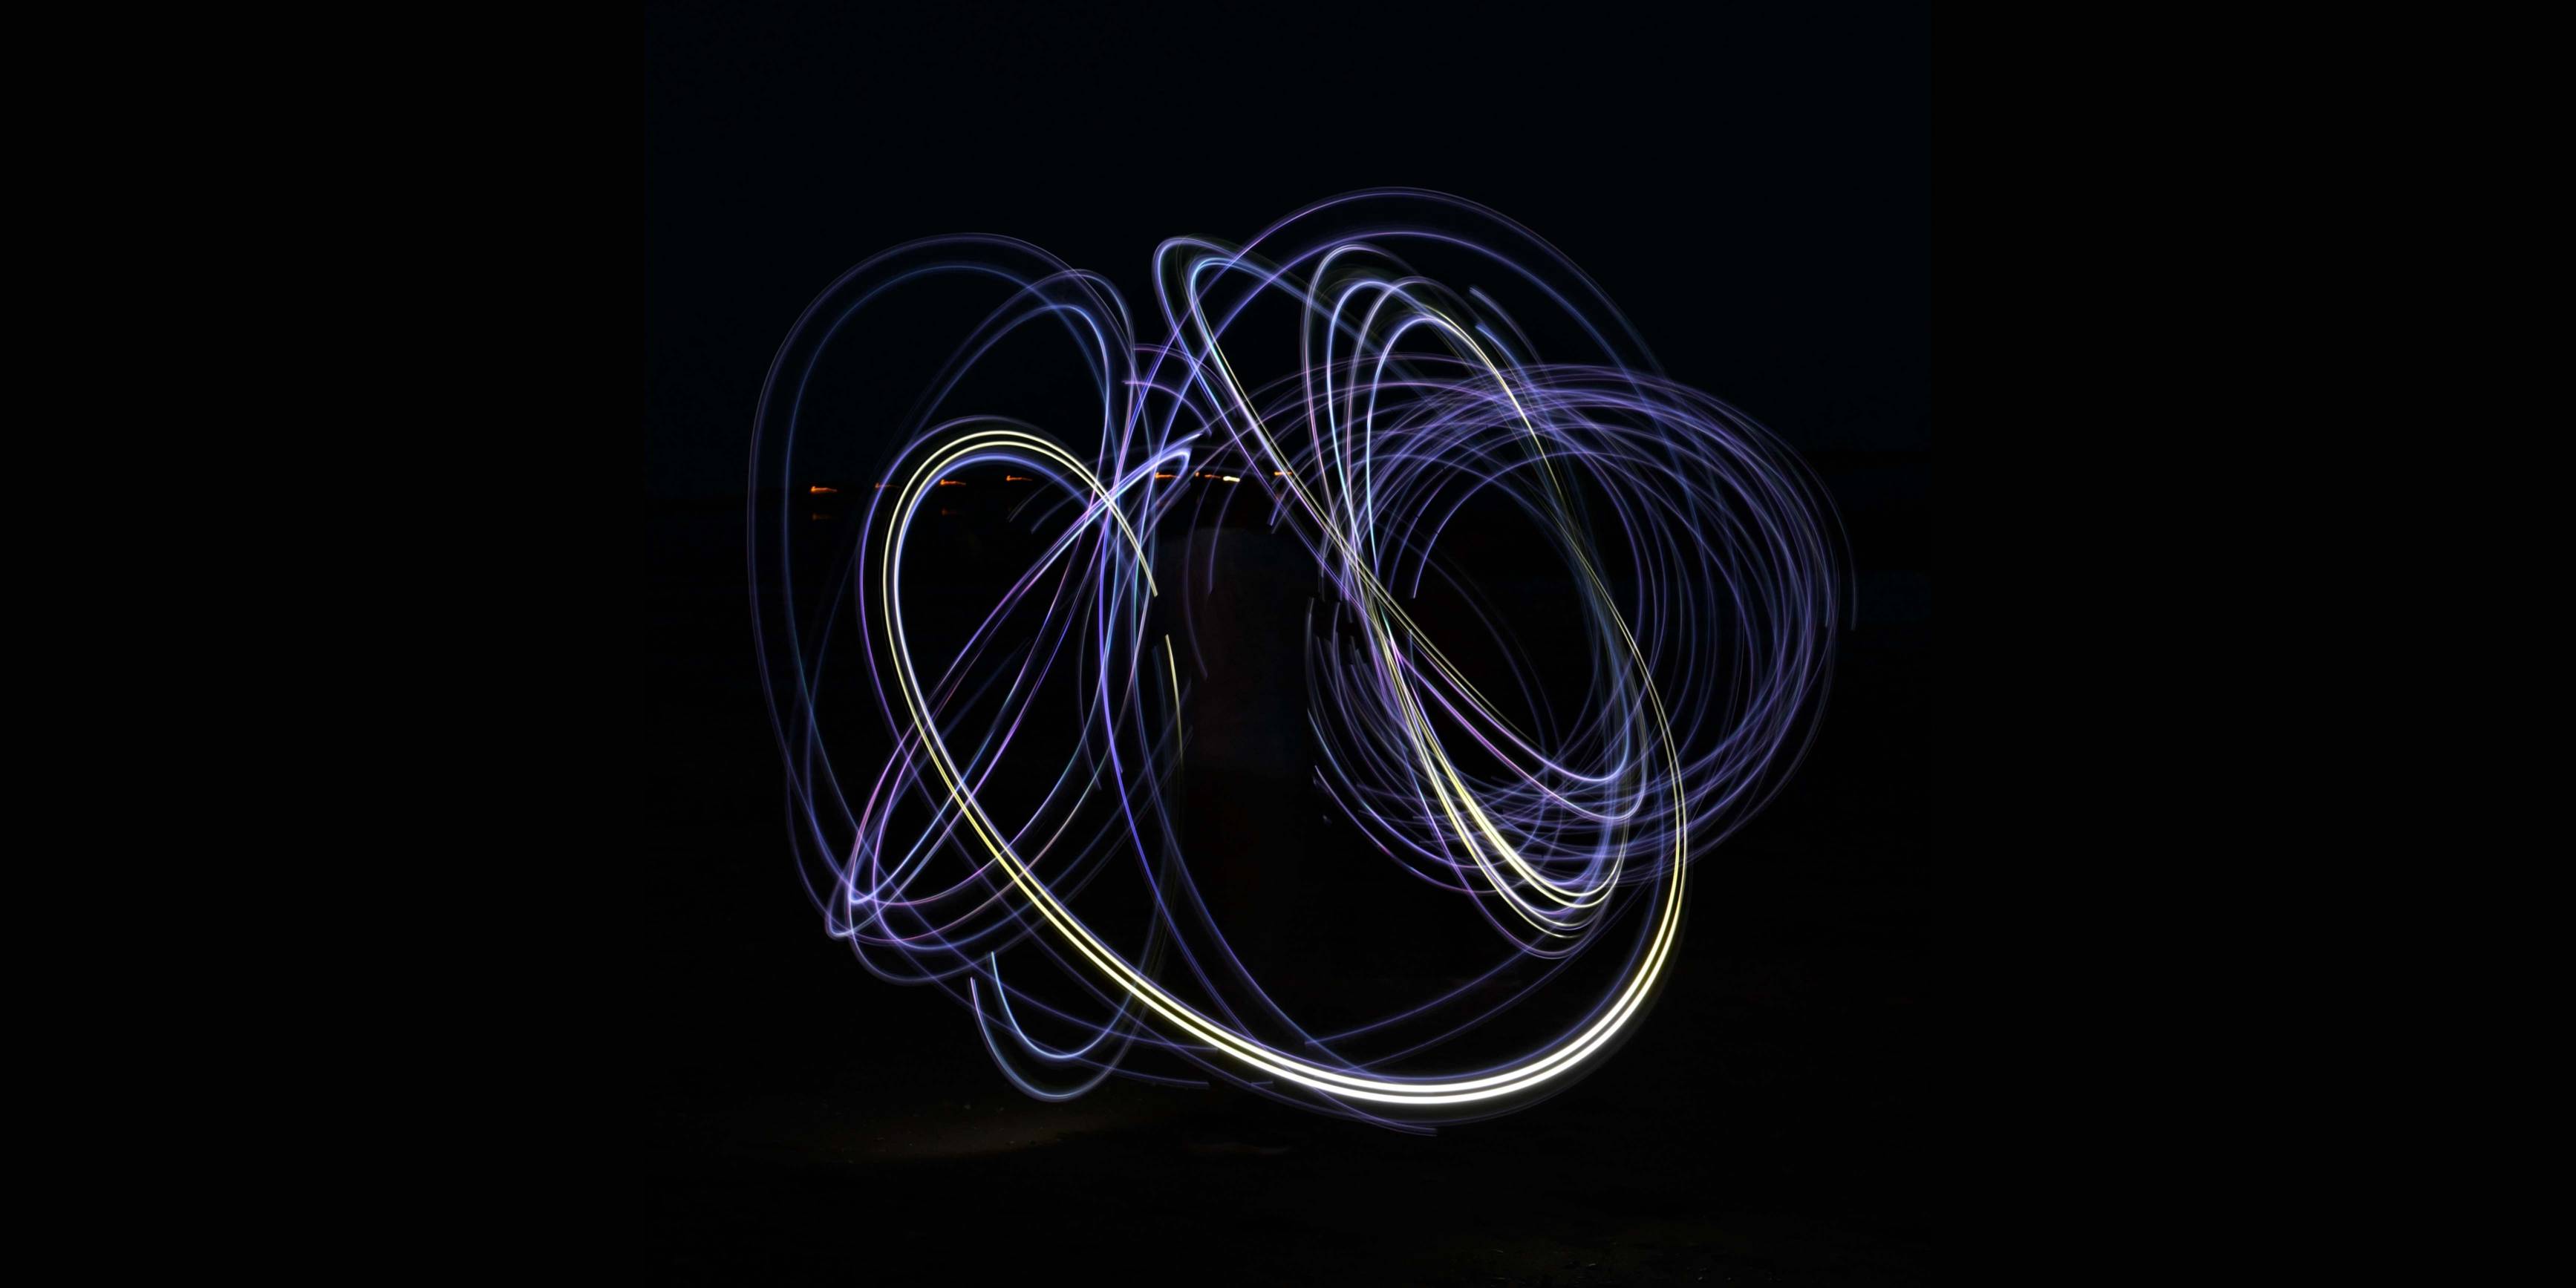 Circles created by long exposure photograph of someone moving a light around in the air.